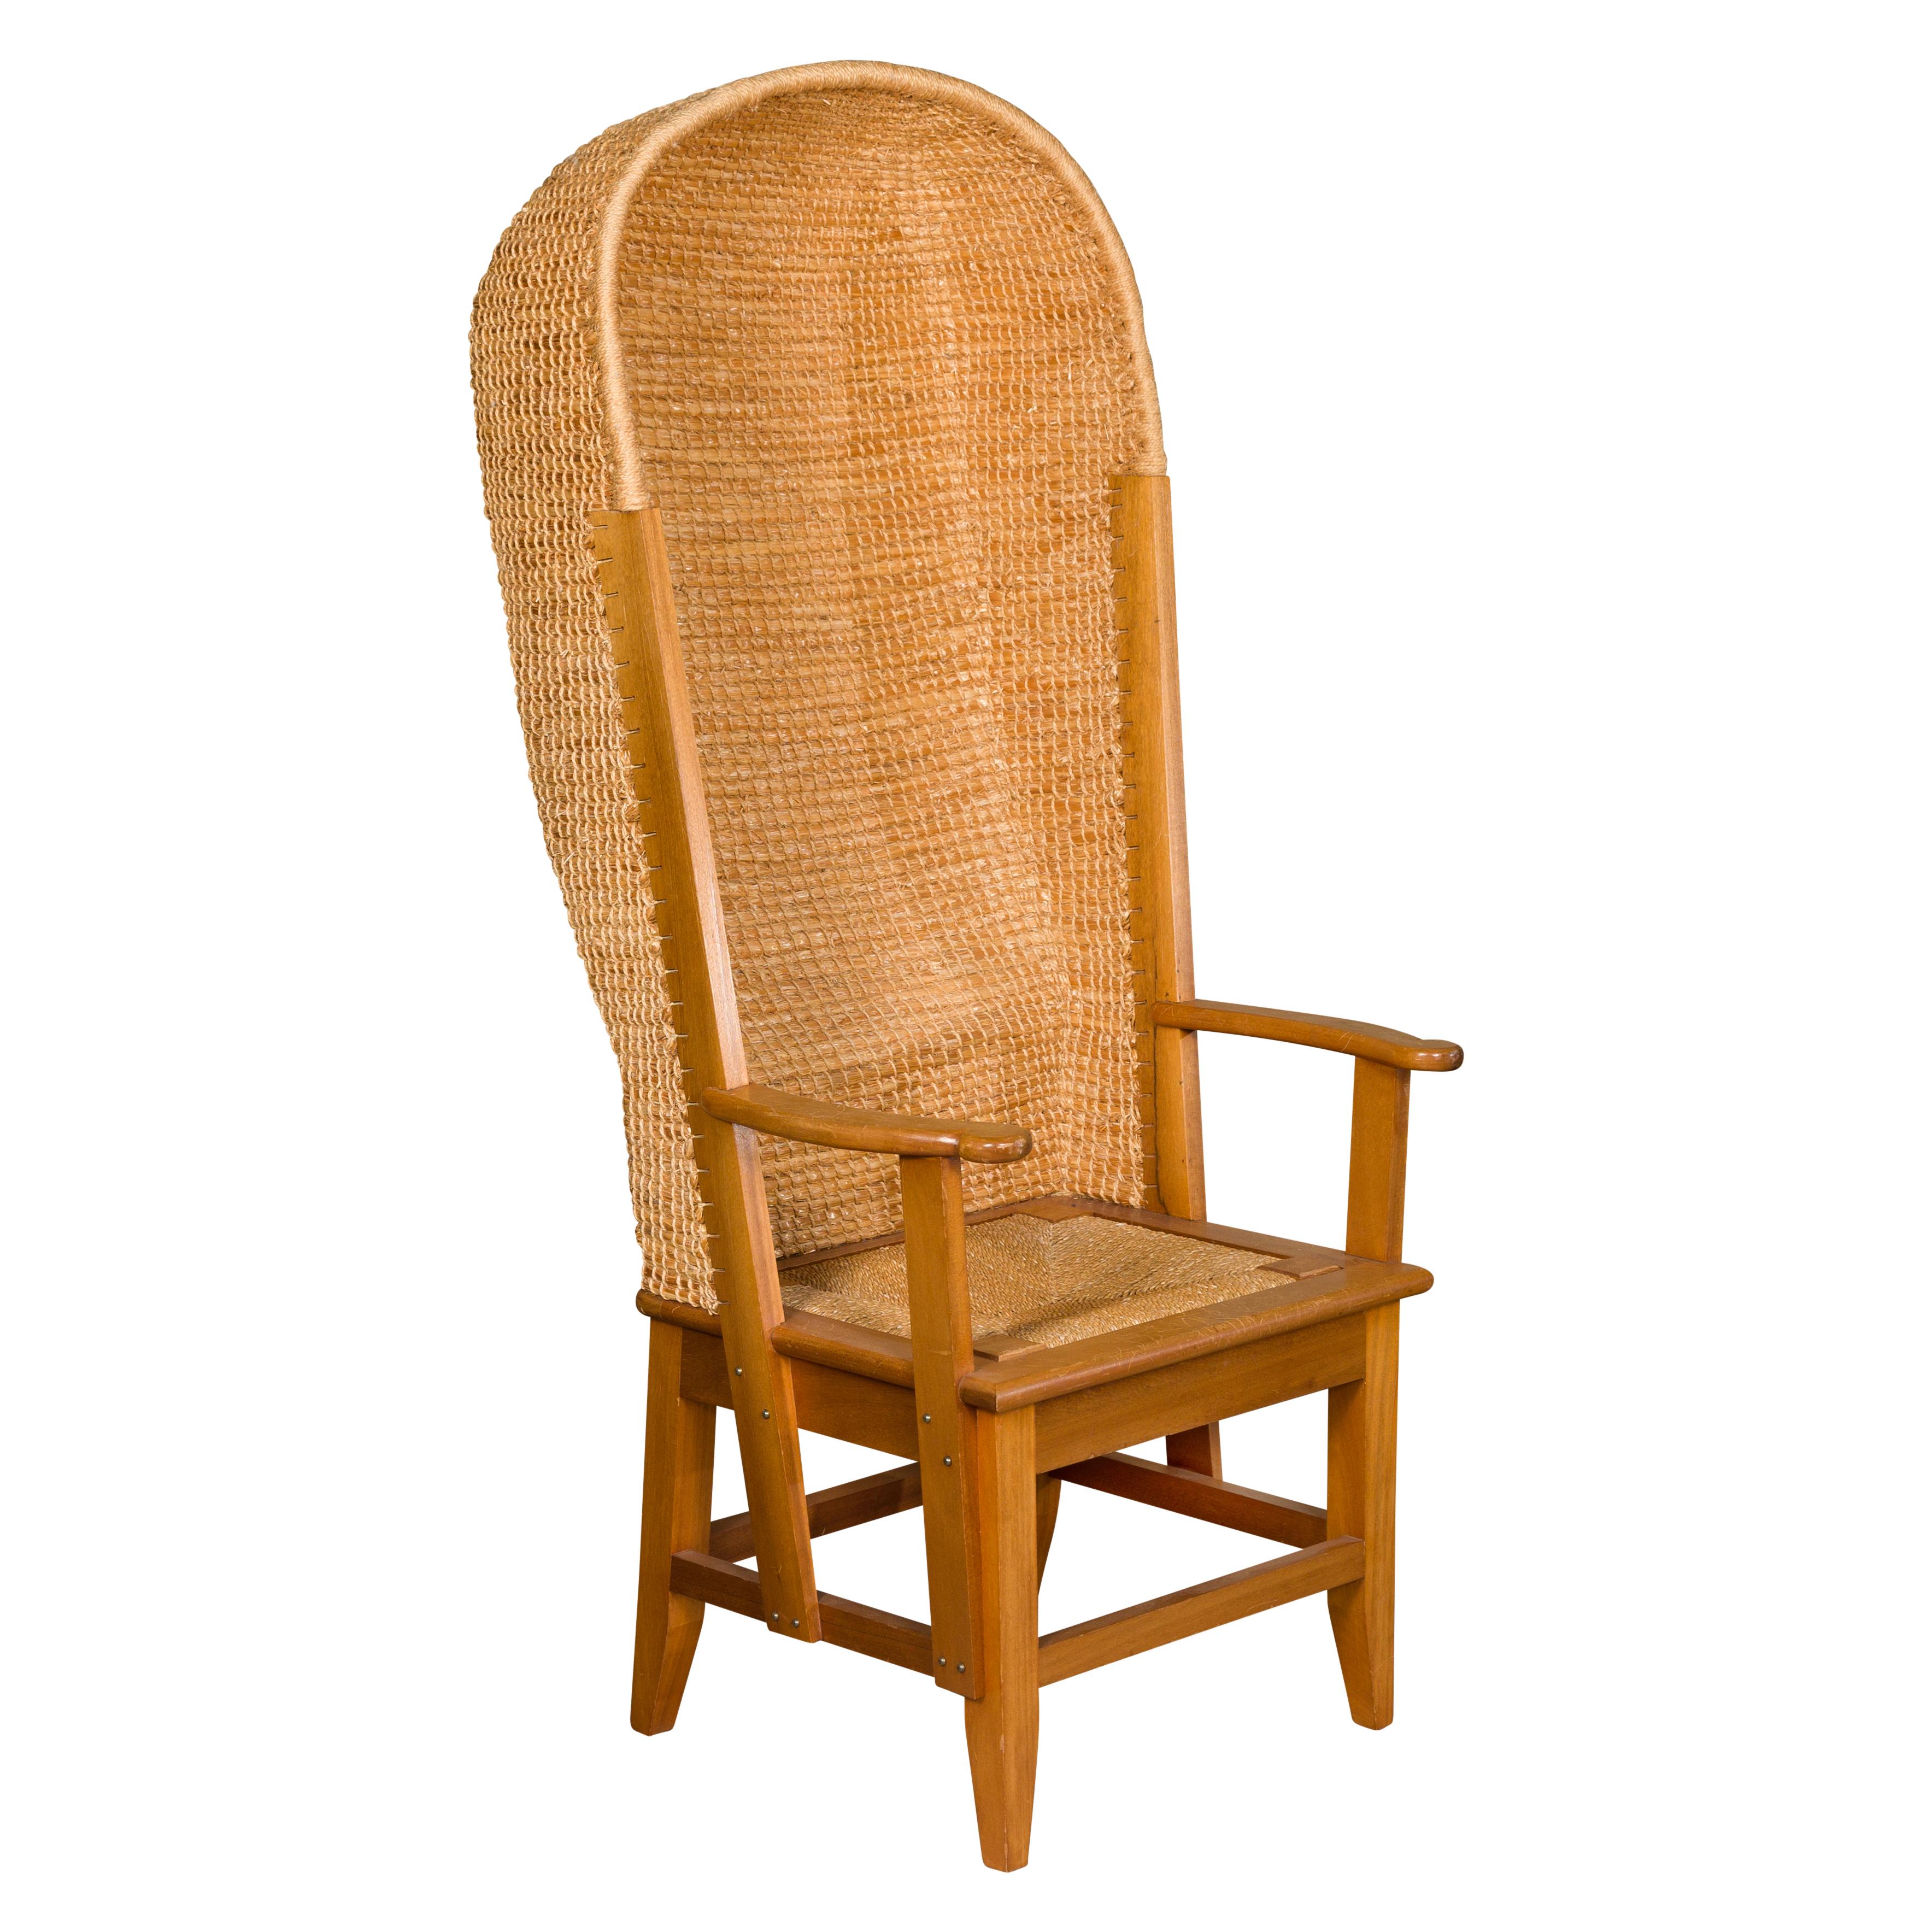 Orkney Island Midcentury Scottish Canopy Chair with Hand Woven Straw Back For Sale 11